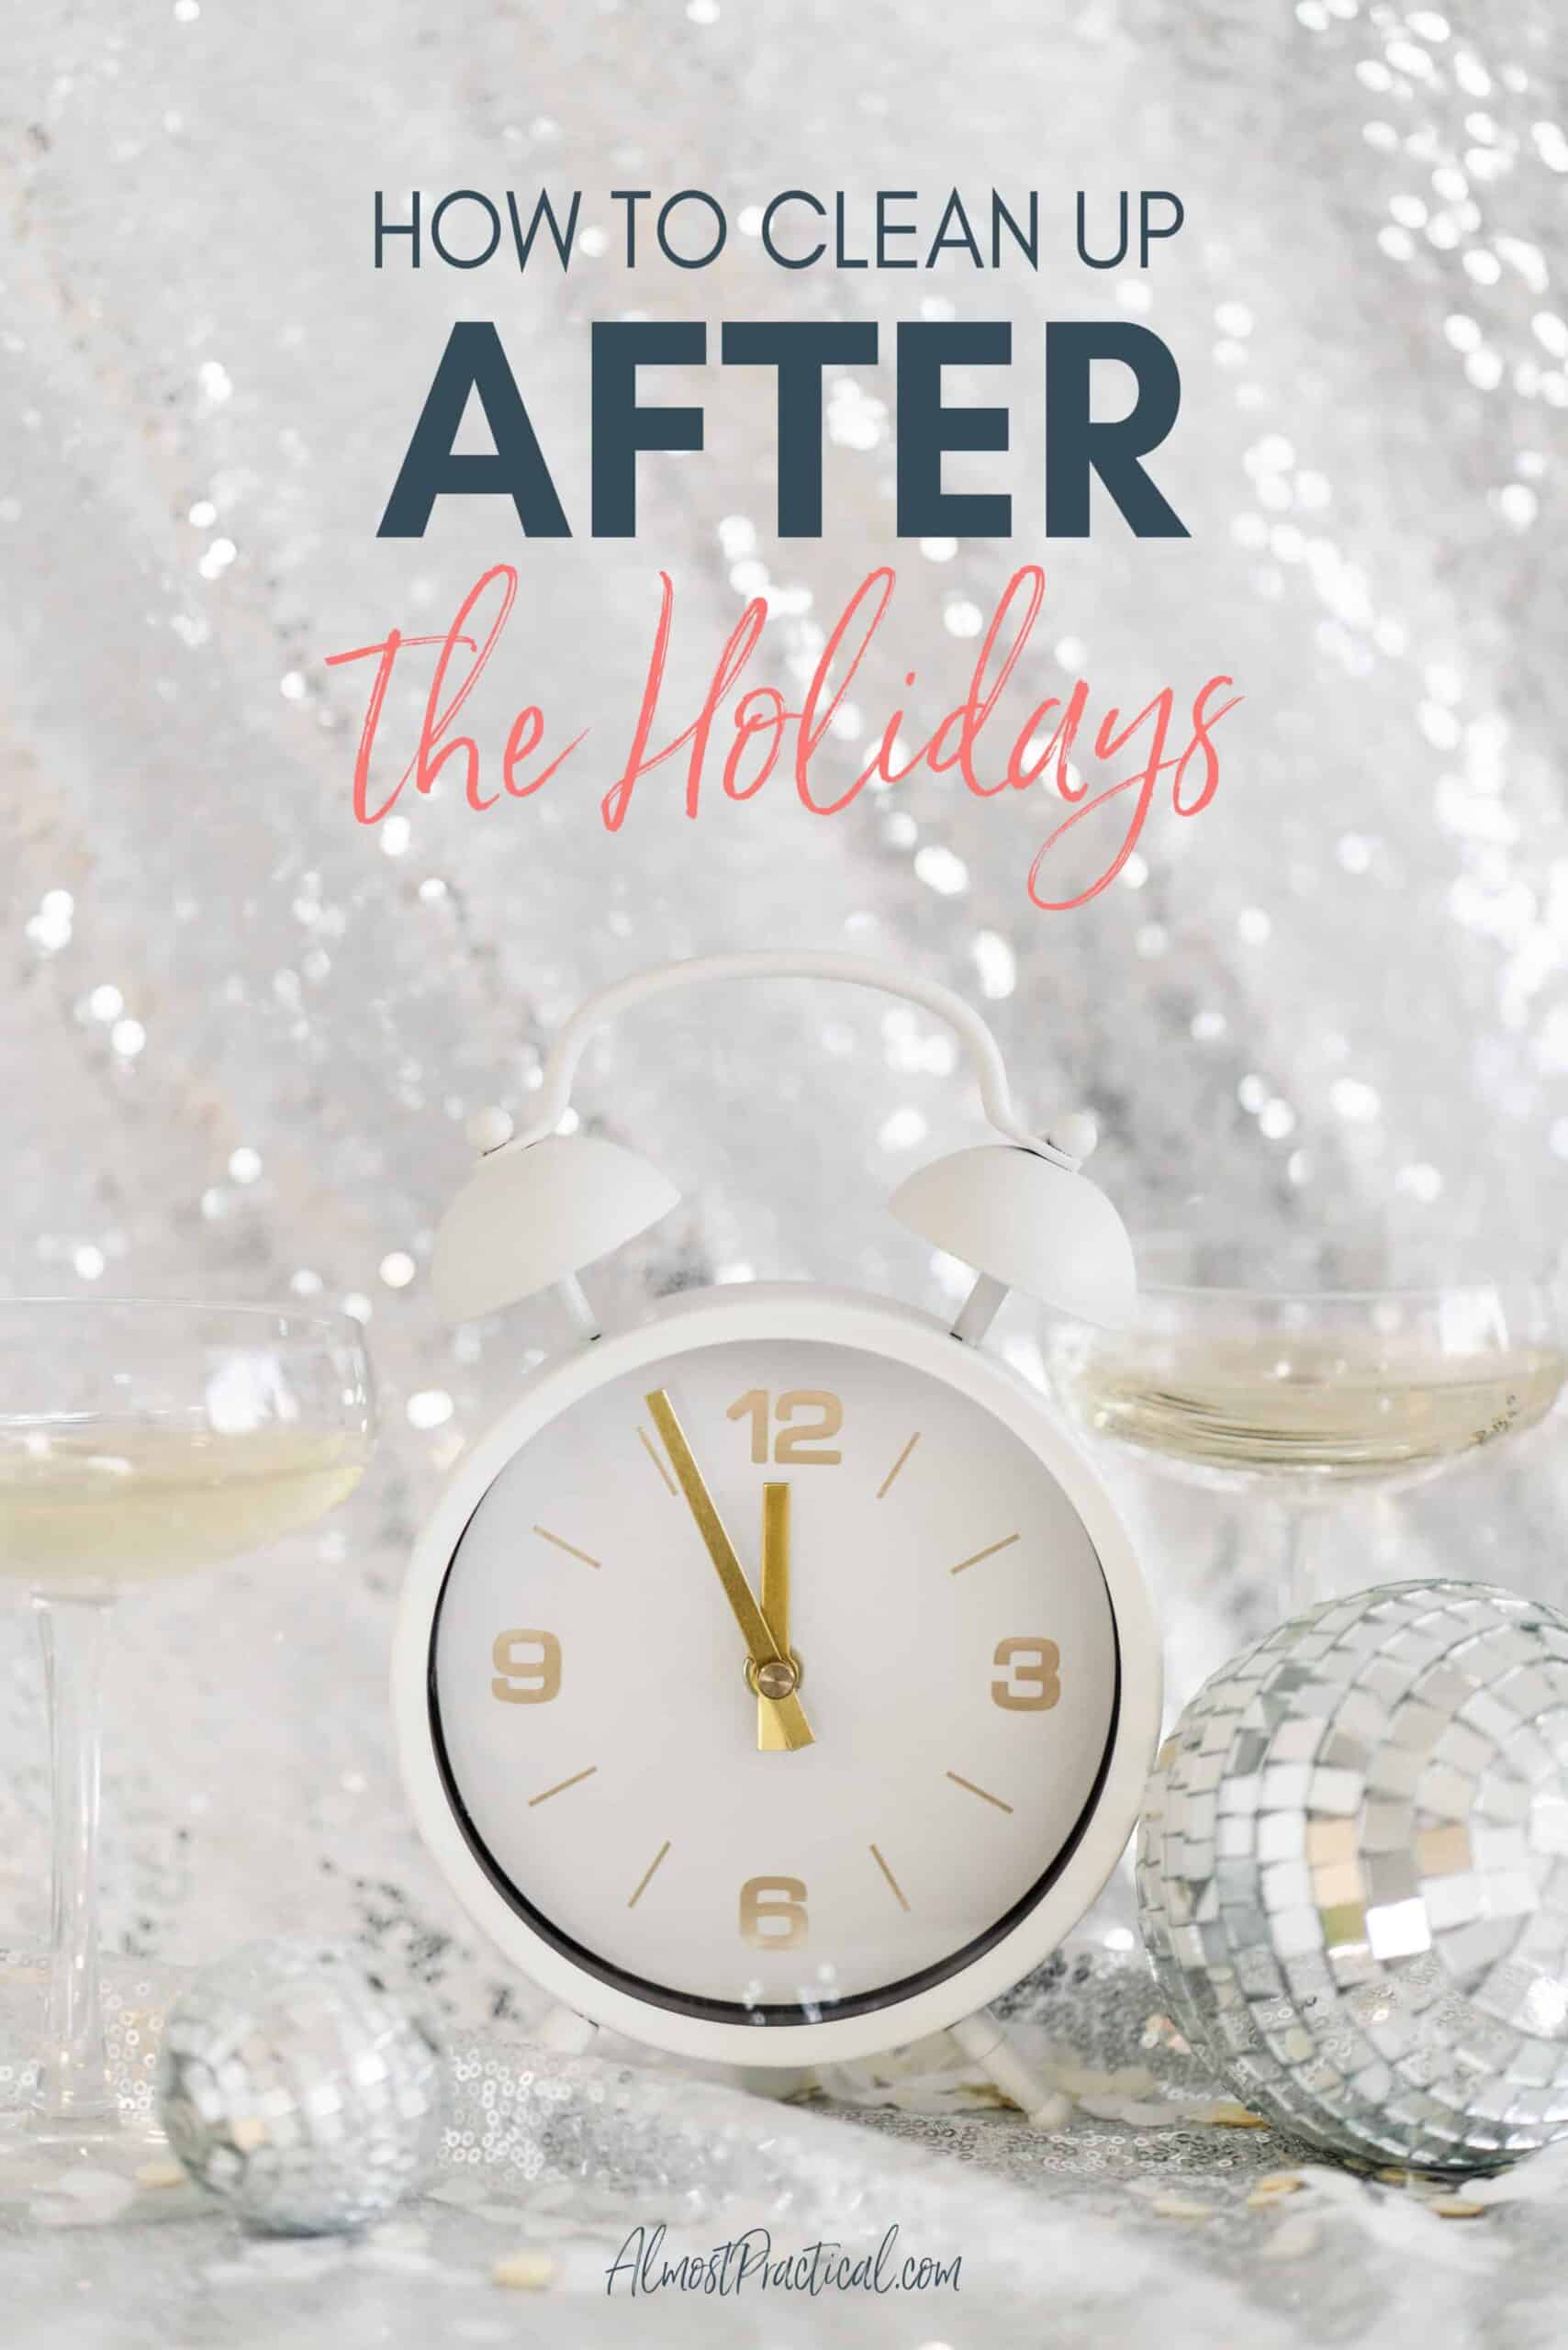 white alarm clock with glittery backdrop, champagne glasses, and mirrored balls